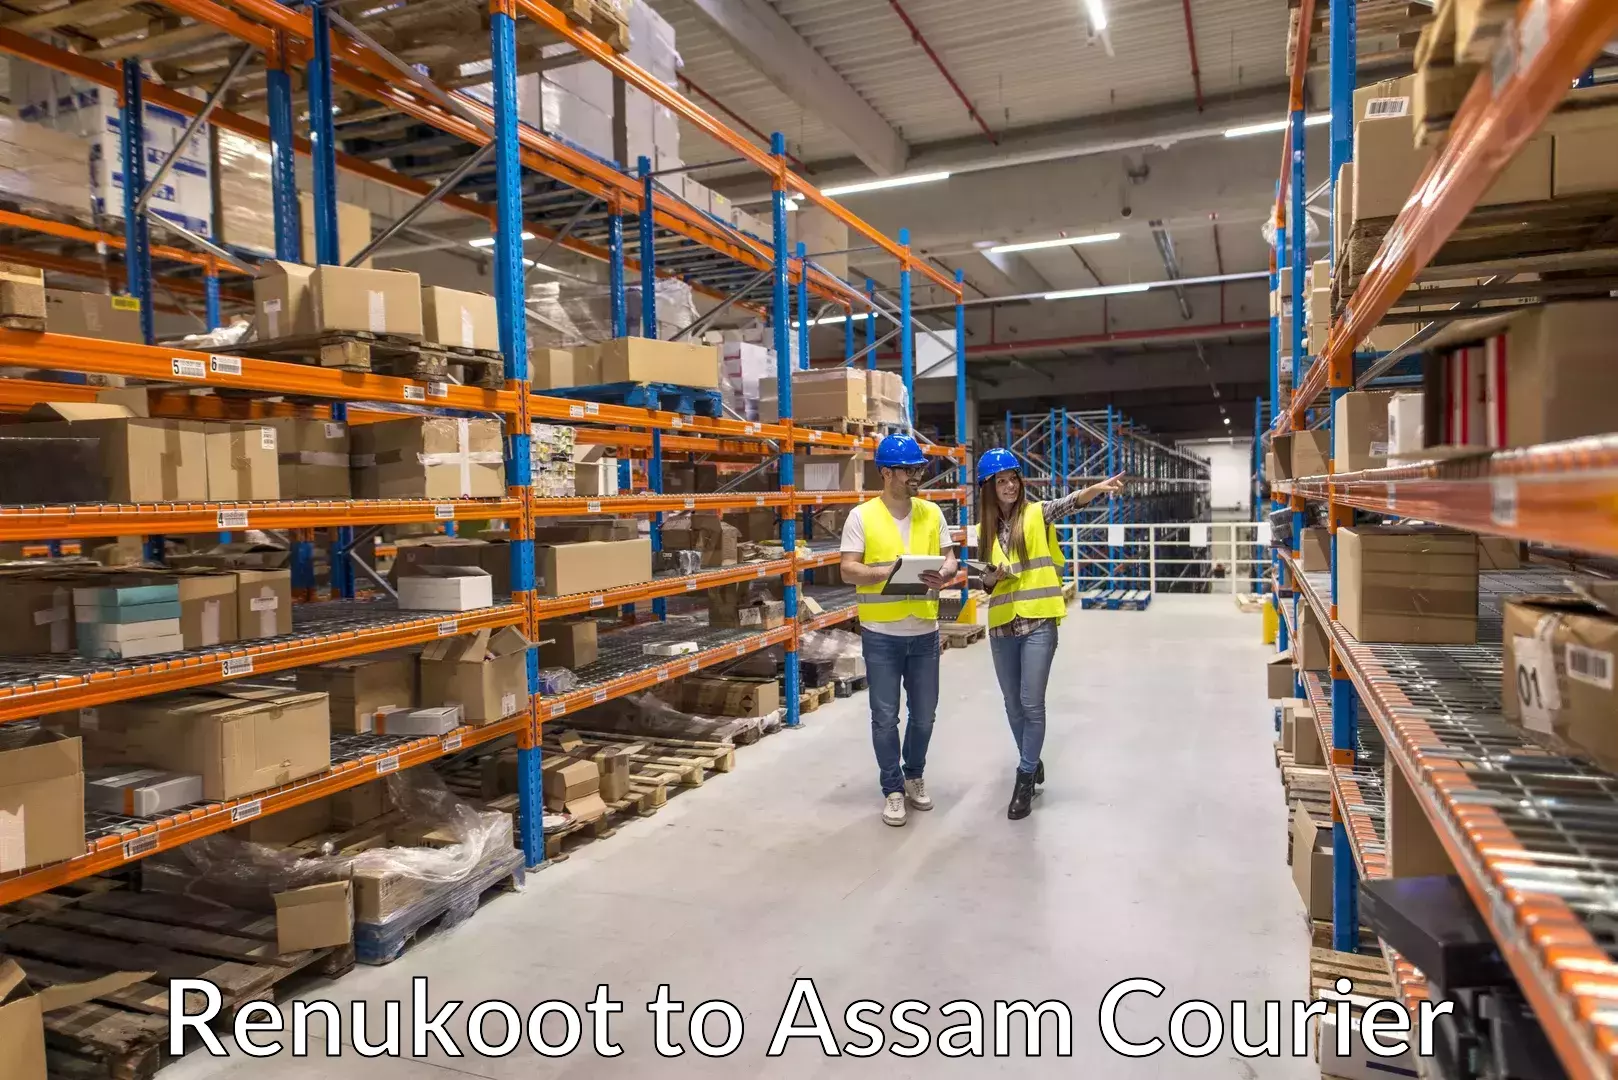 Luggage shipment tracking in Renukoot to Assam